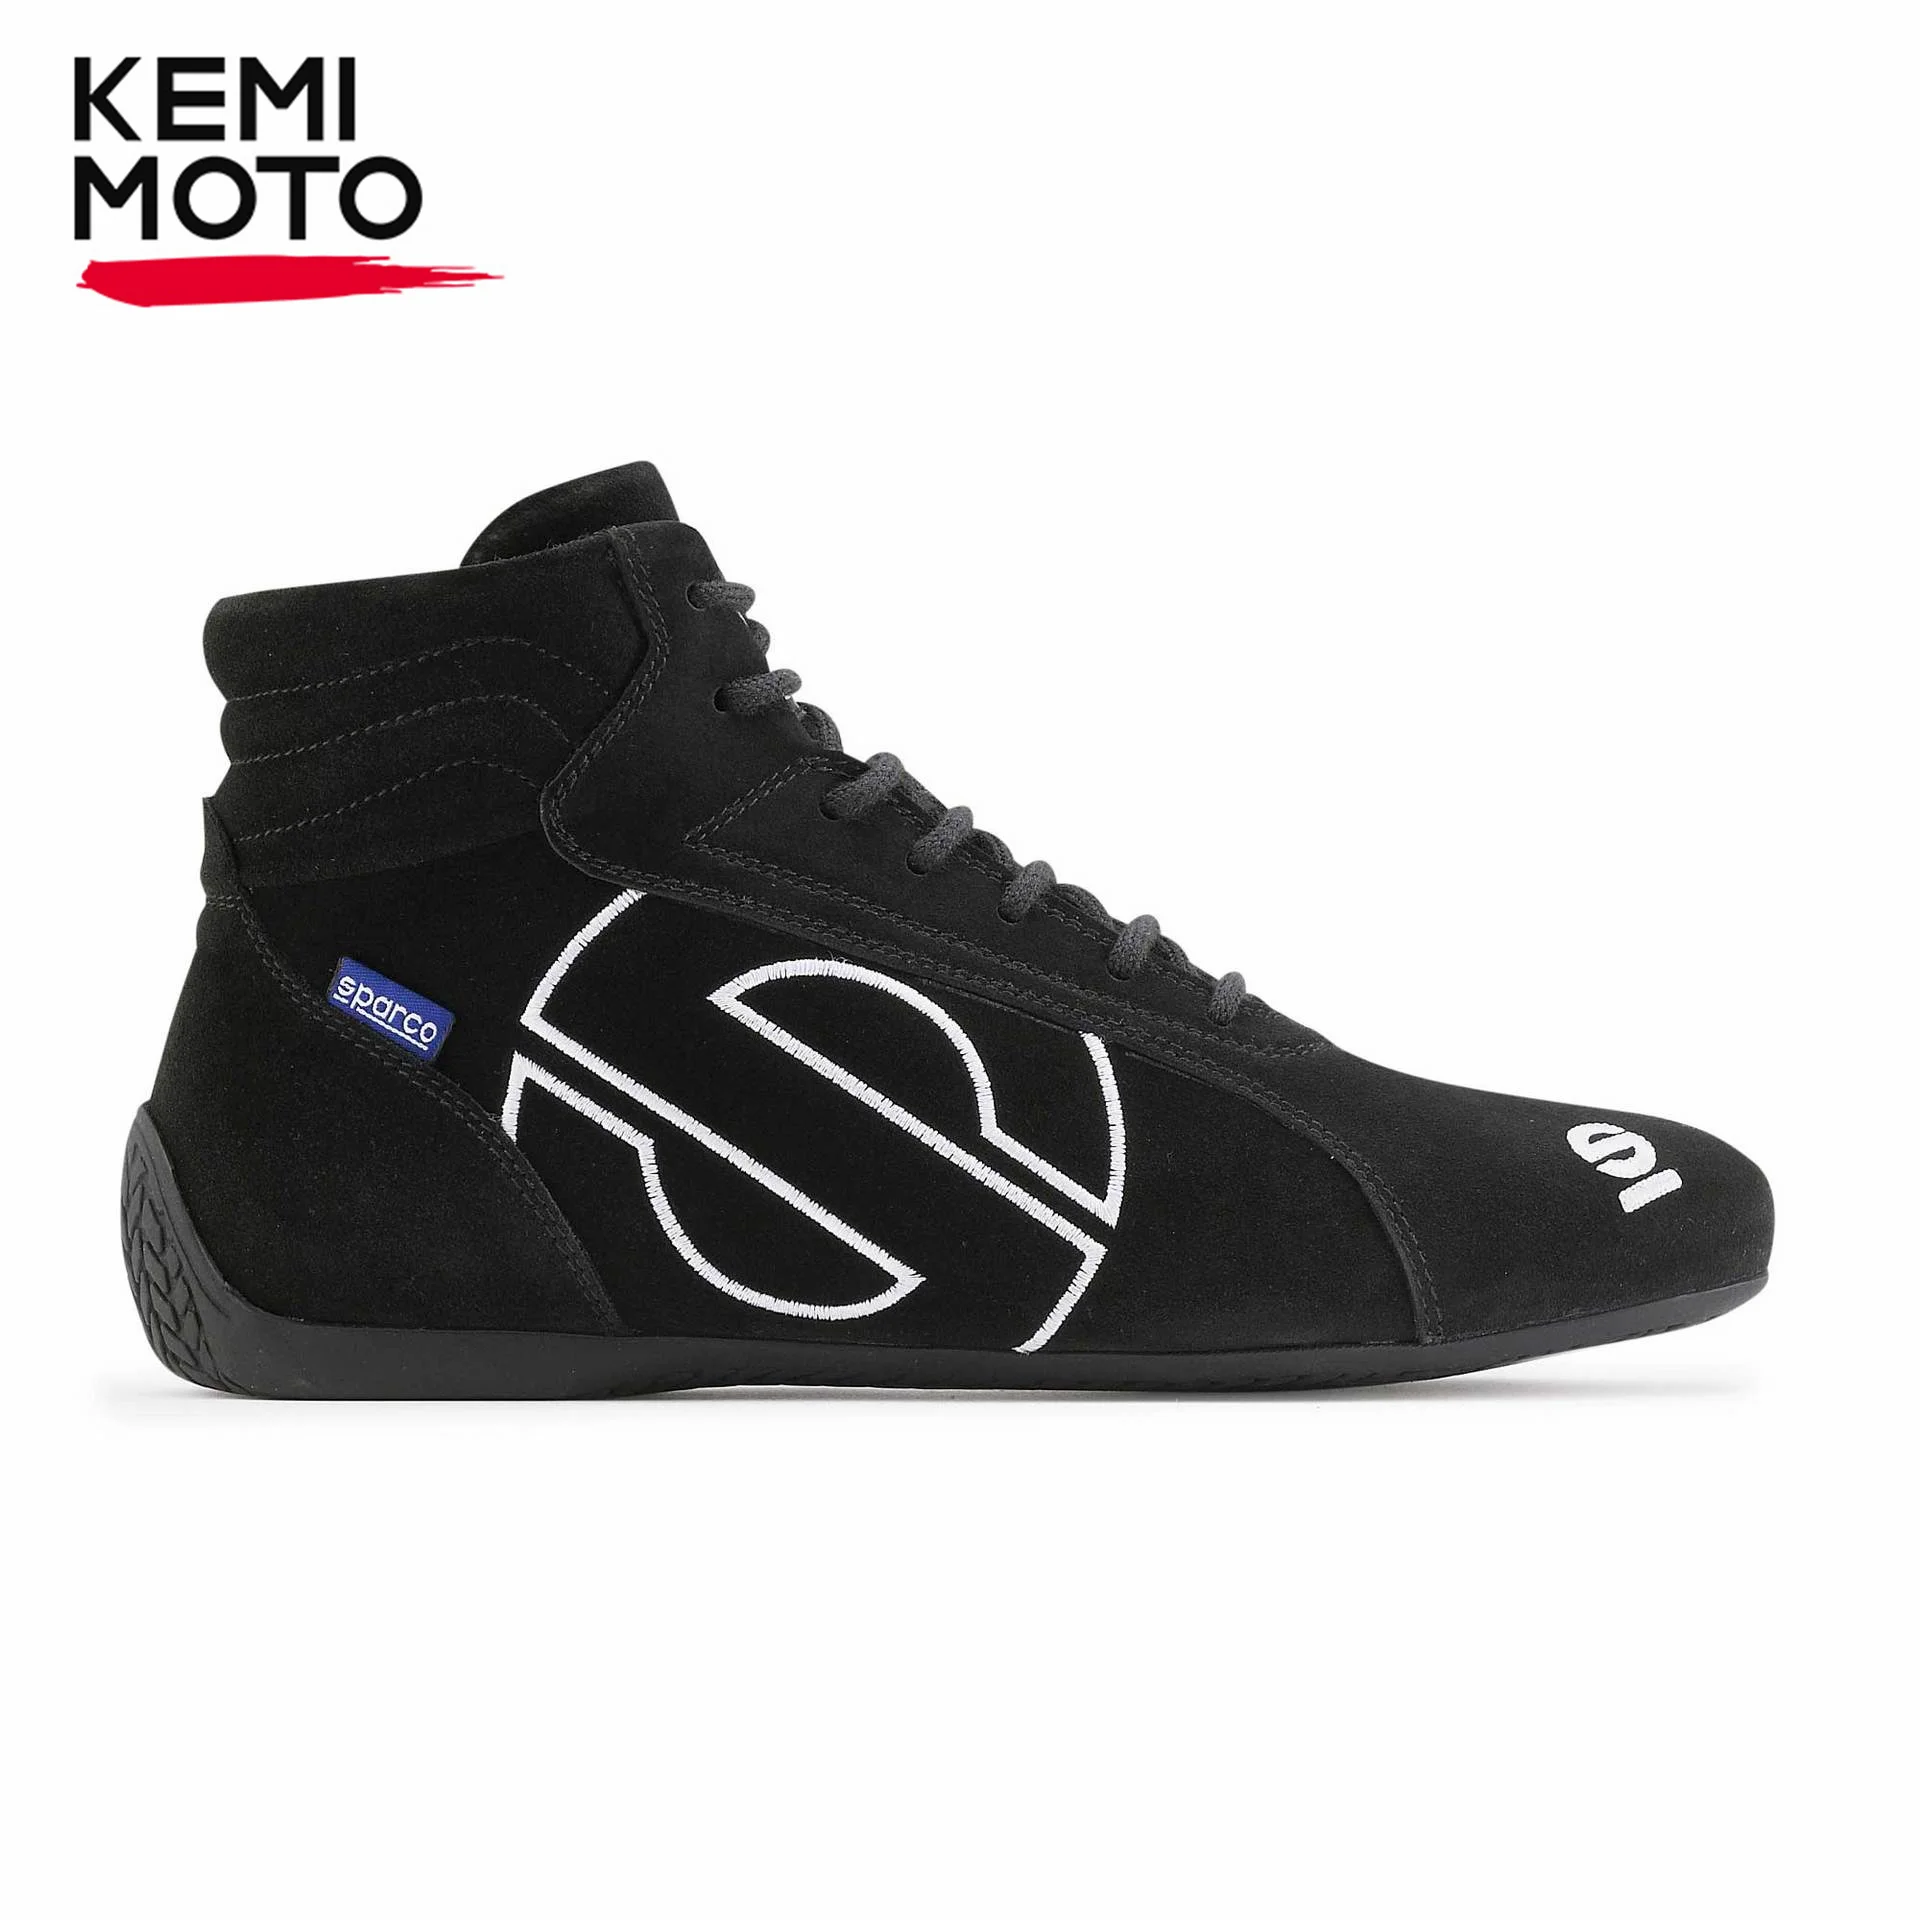 Motorcycle Boots Unisex Karting Car Shoes Motocross Racing Club Exercise Shoes ATV UTV Professional Fluff Sports Shoes Cowhide enlarge